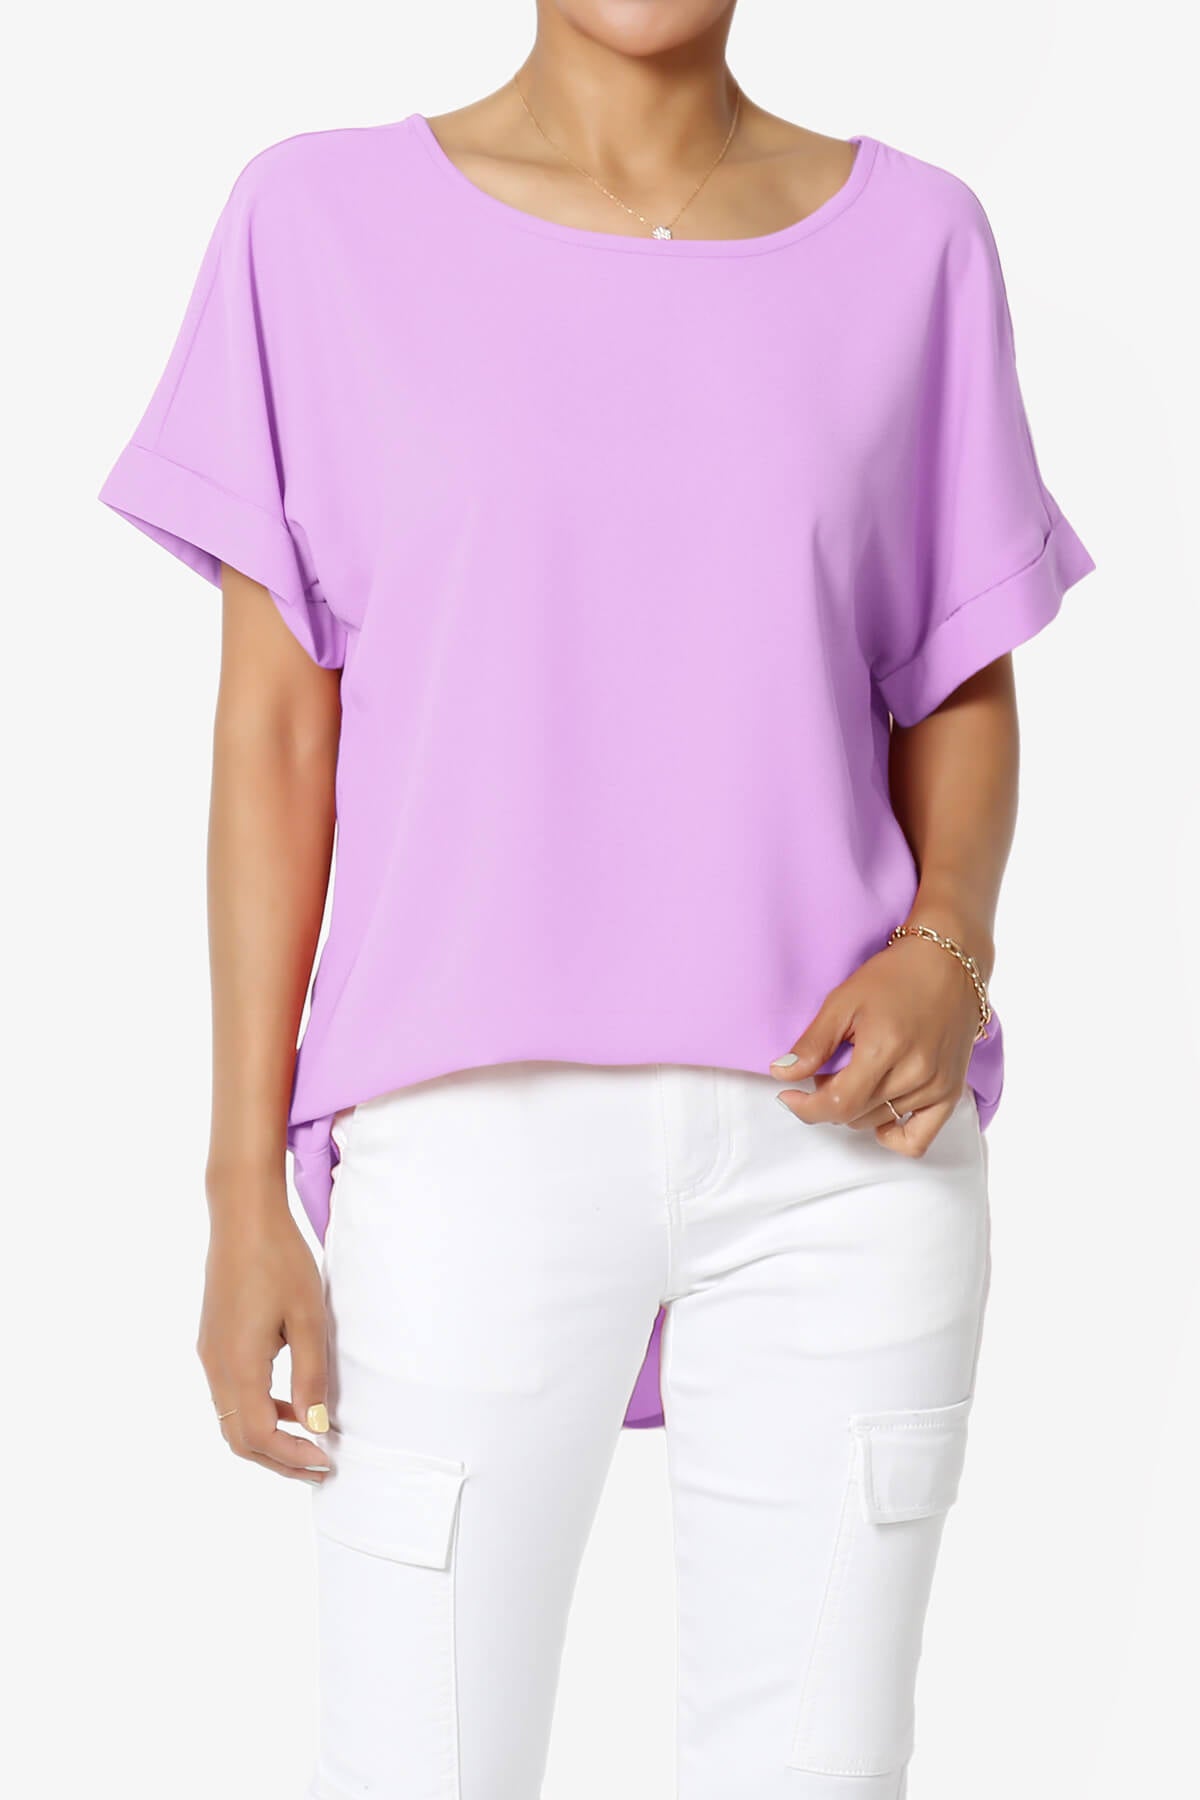 Load image into Gallery viewer, Marla Lightweight Woven Dolman Top BRIGHT LAVENDER_1
